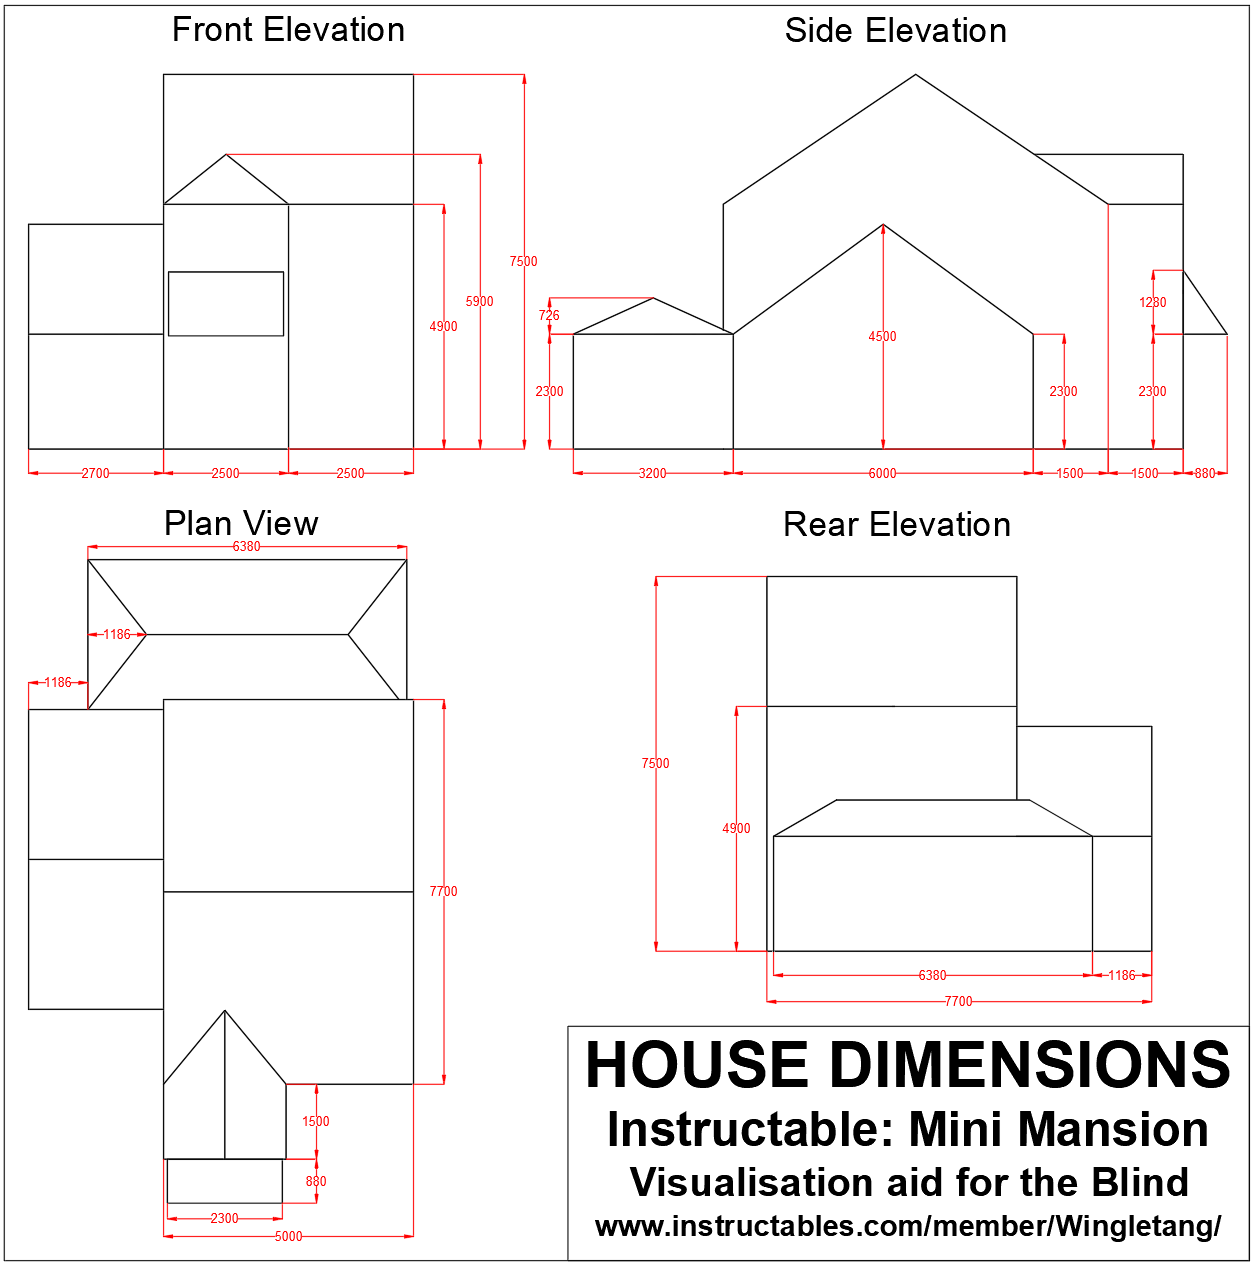 House Dimensions.png